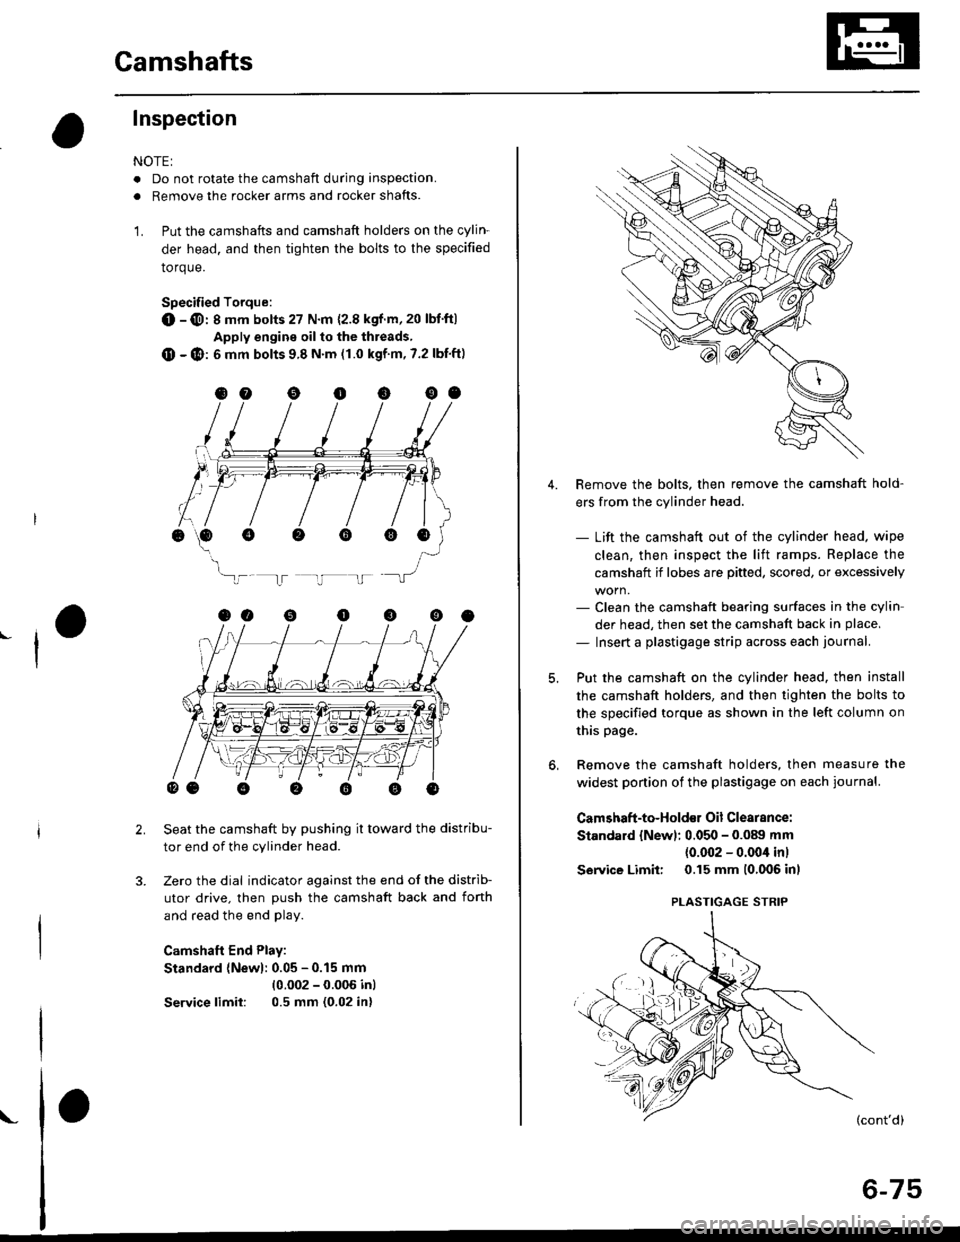 HONDA CIVIC 1996 6.G Service Manual Camshafts
Inspection
NOTE:
. Do not rotate the camshaft during inspection.
. Removg the rocker arms and rocker shafts.
L Put the camshafts and camshaft holders on the cylin-
der head. and then tighte